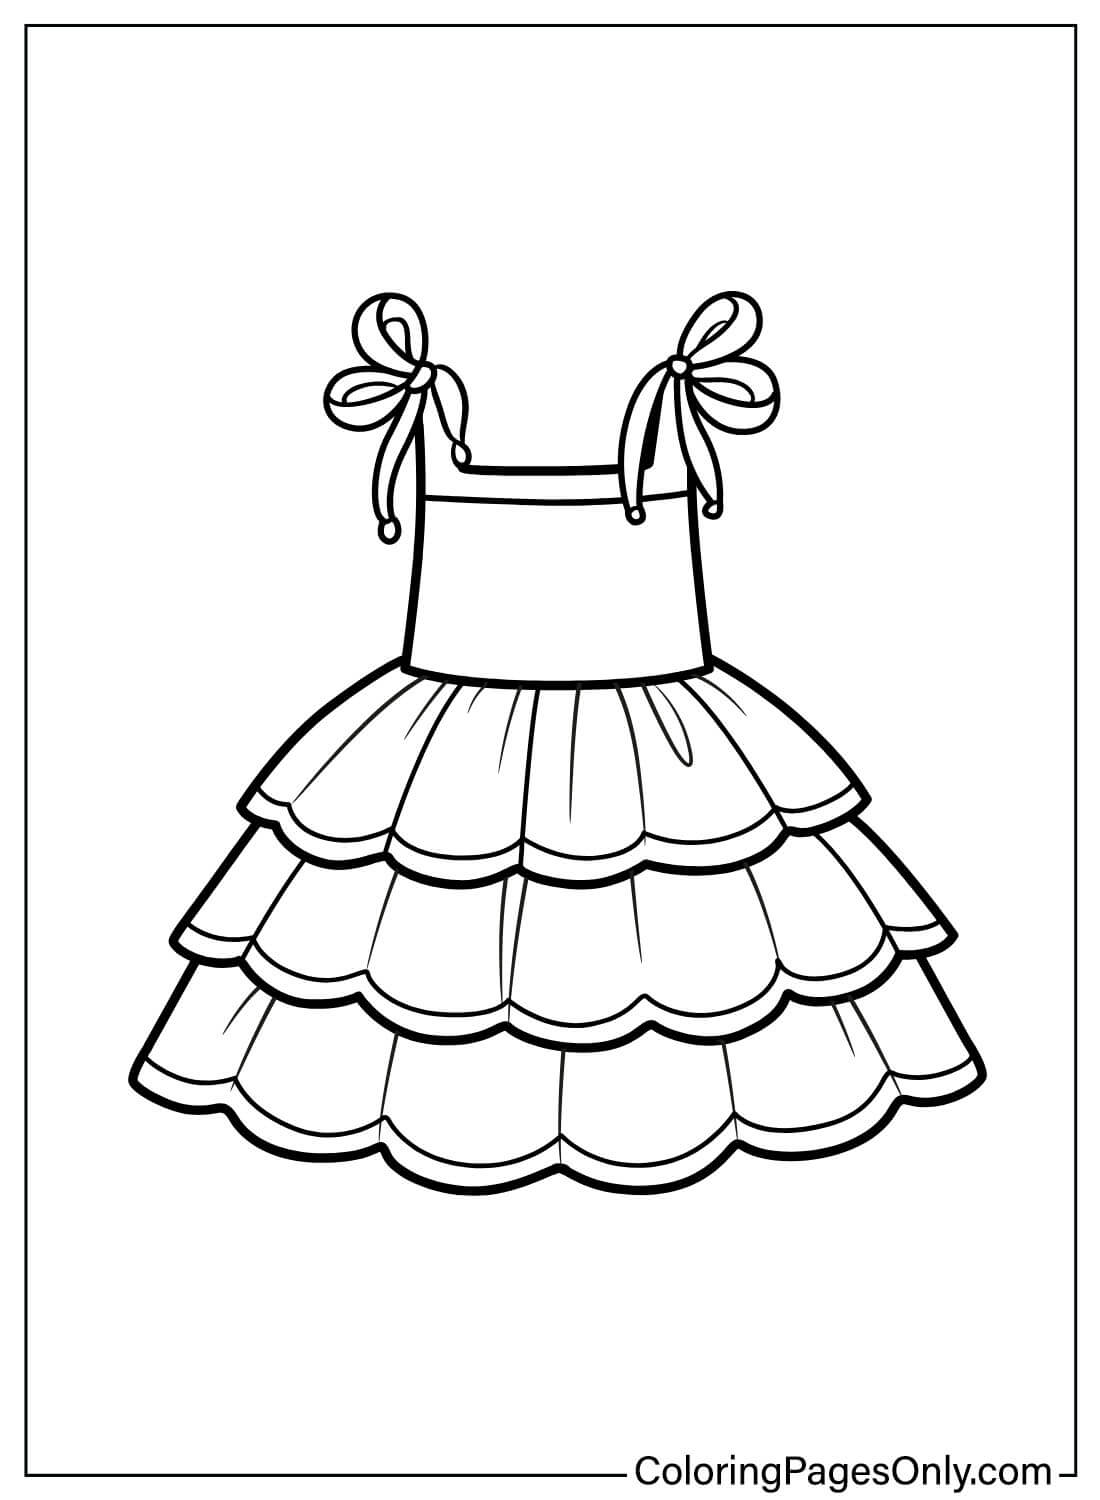 Free Baby Dress Coloring Page - Free Printable Coloring Pages